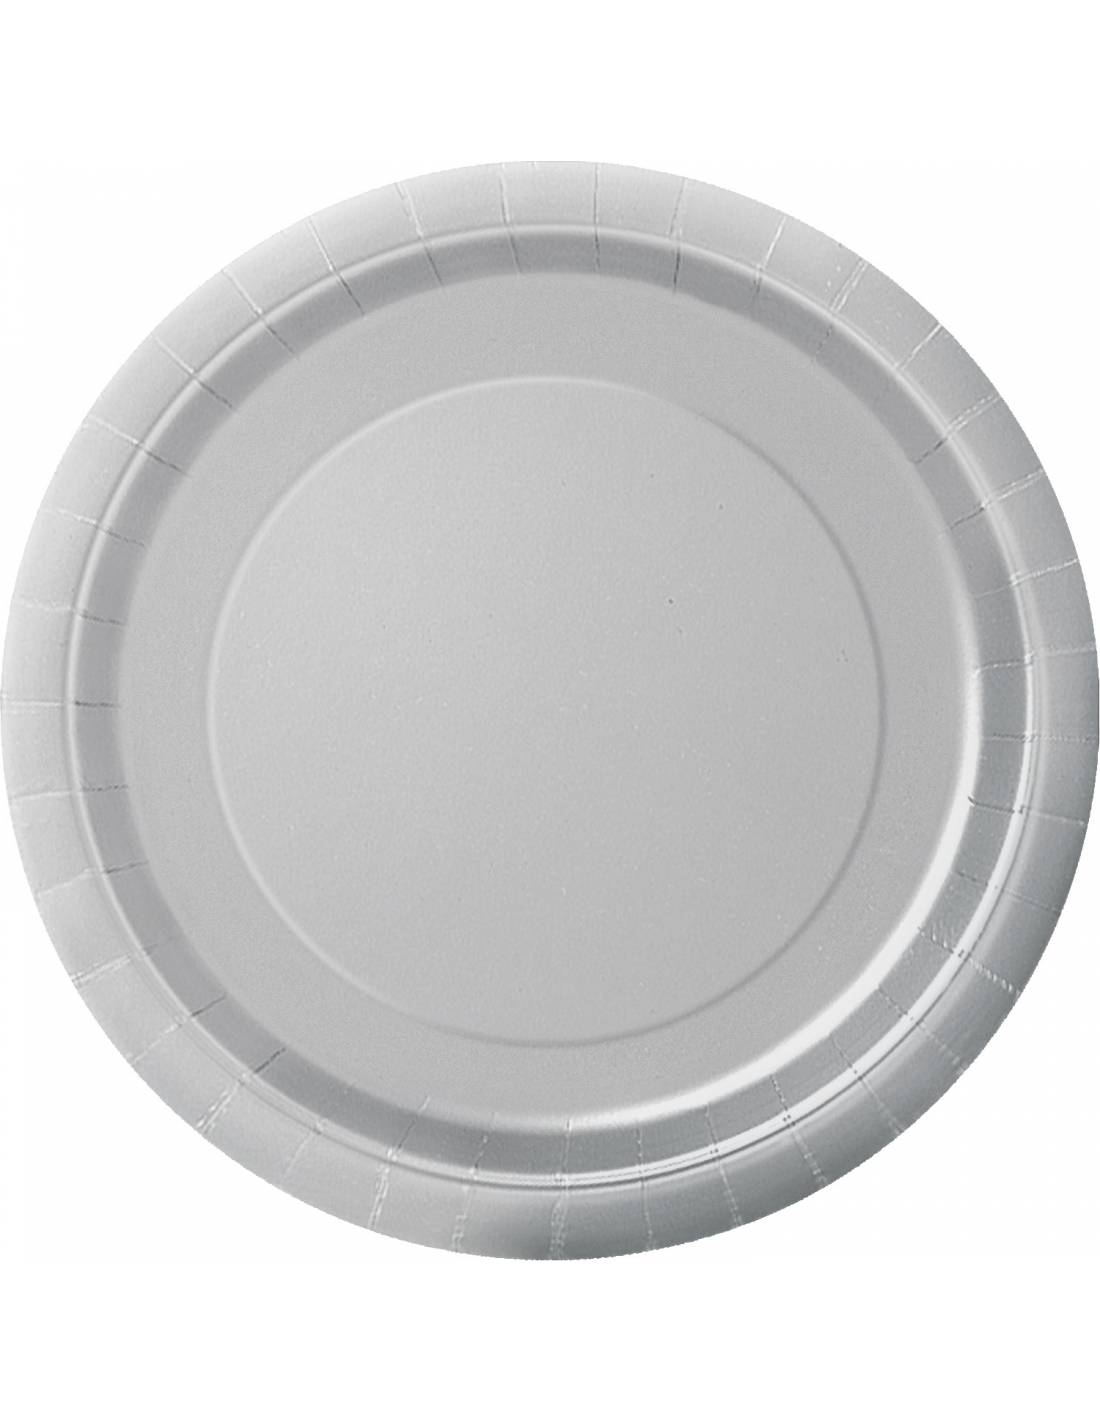 Eco basic silver plate